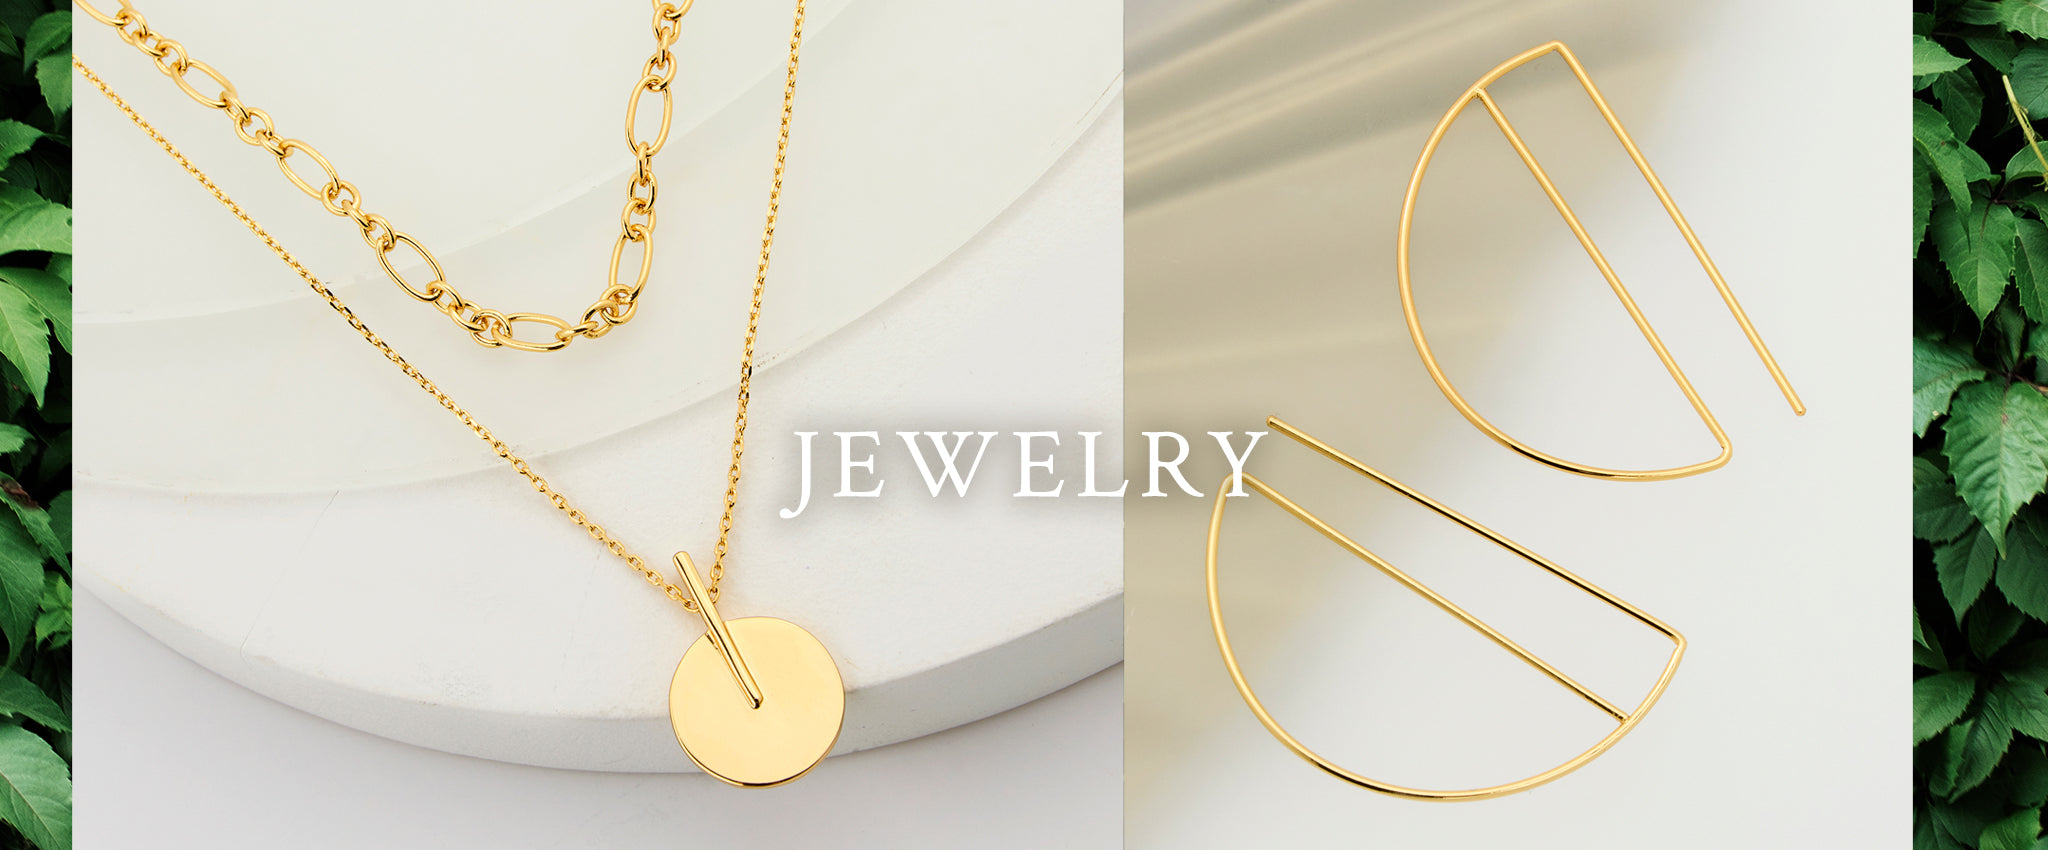 Gold necklace with circular pendant and geometric shaped earrings